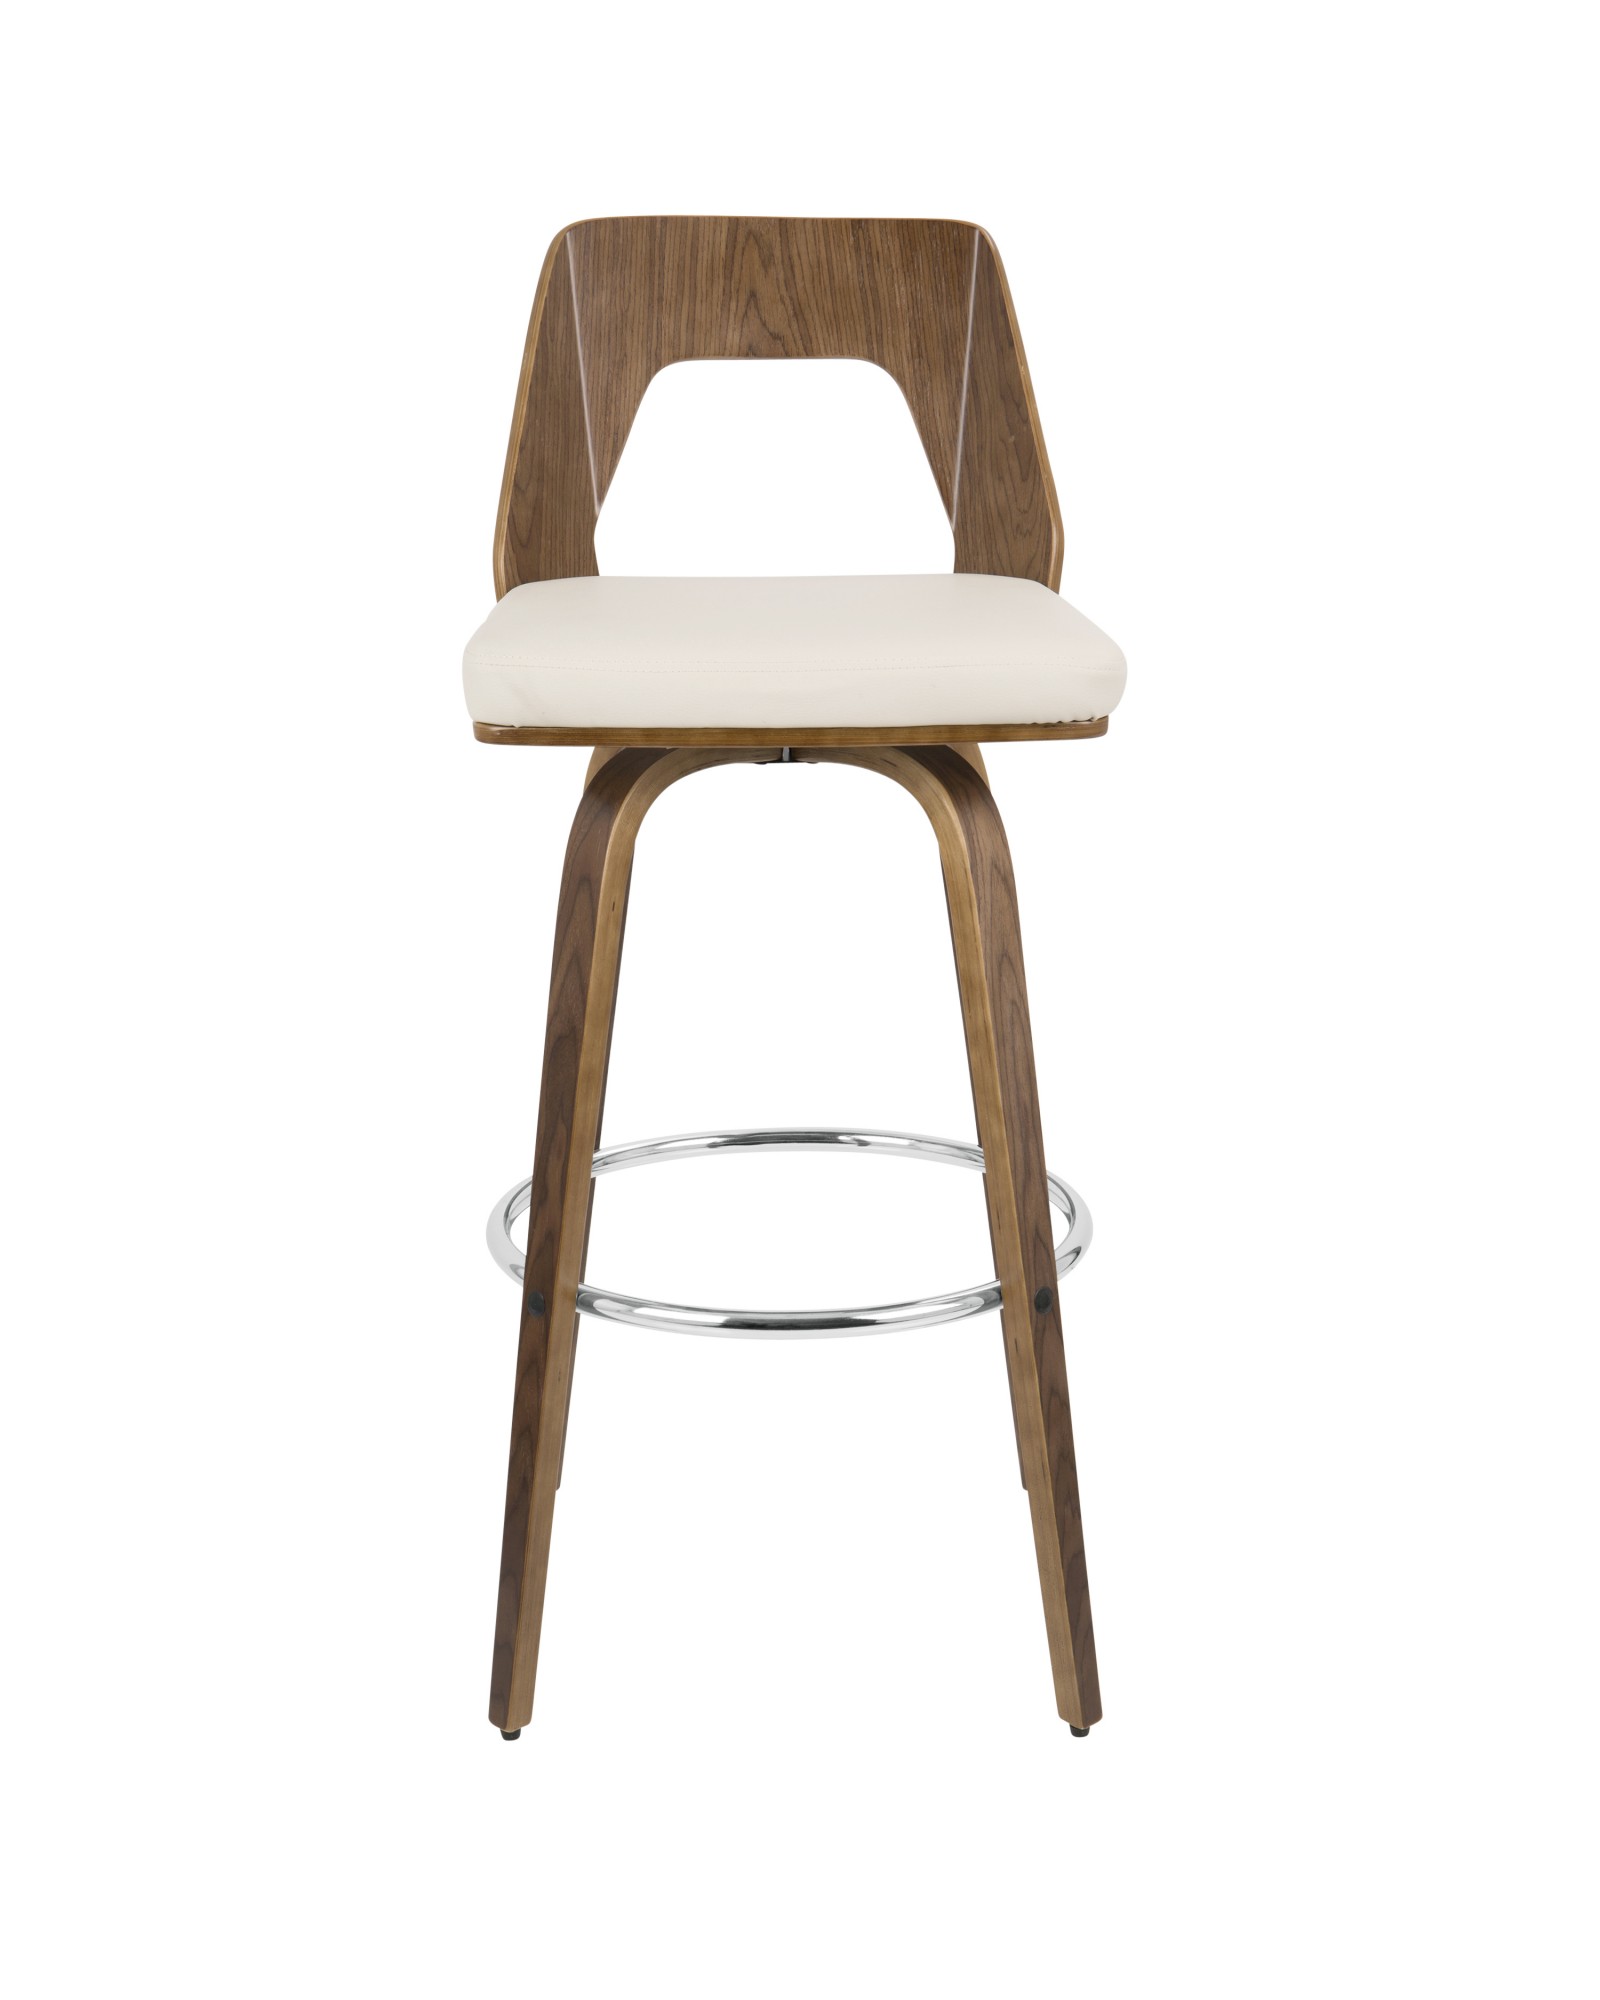 Trilogy Mid-Century Modern Barstool in Walnut and Cream Faux Leather